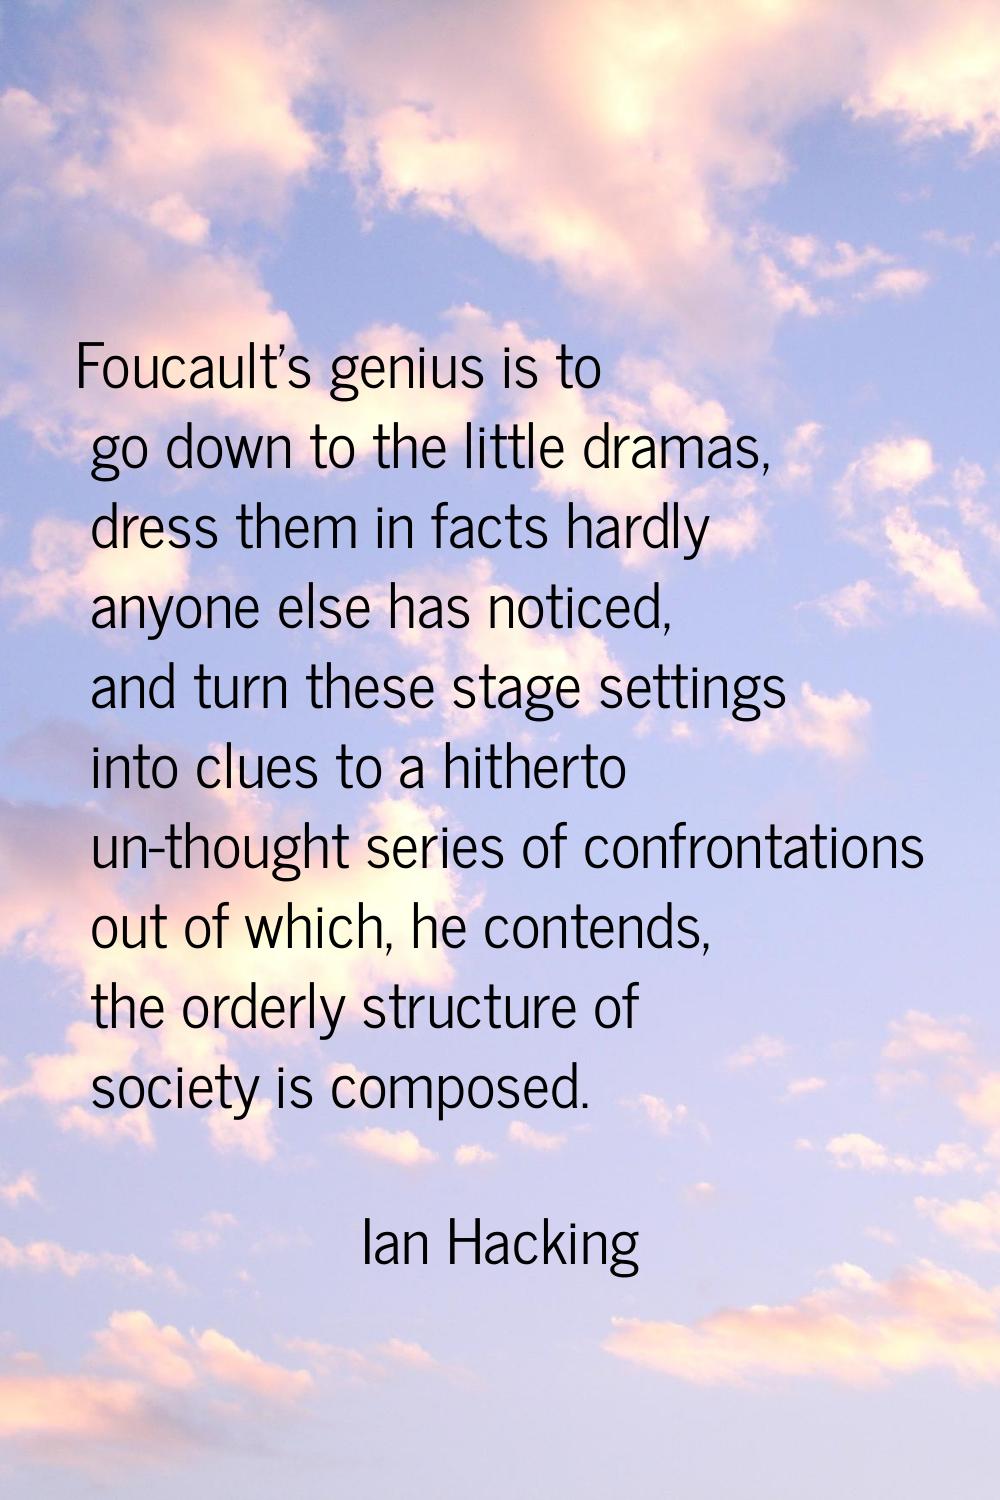 Foucault's genius is to go down to the little dramas, dress them in facts hardly anyone else has no